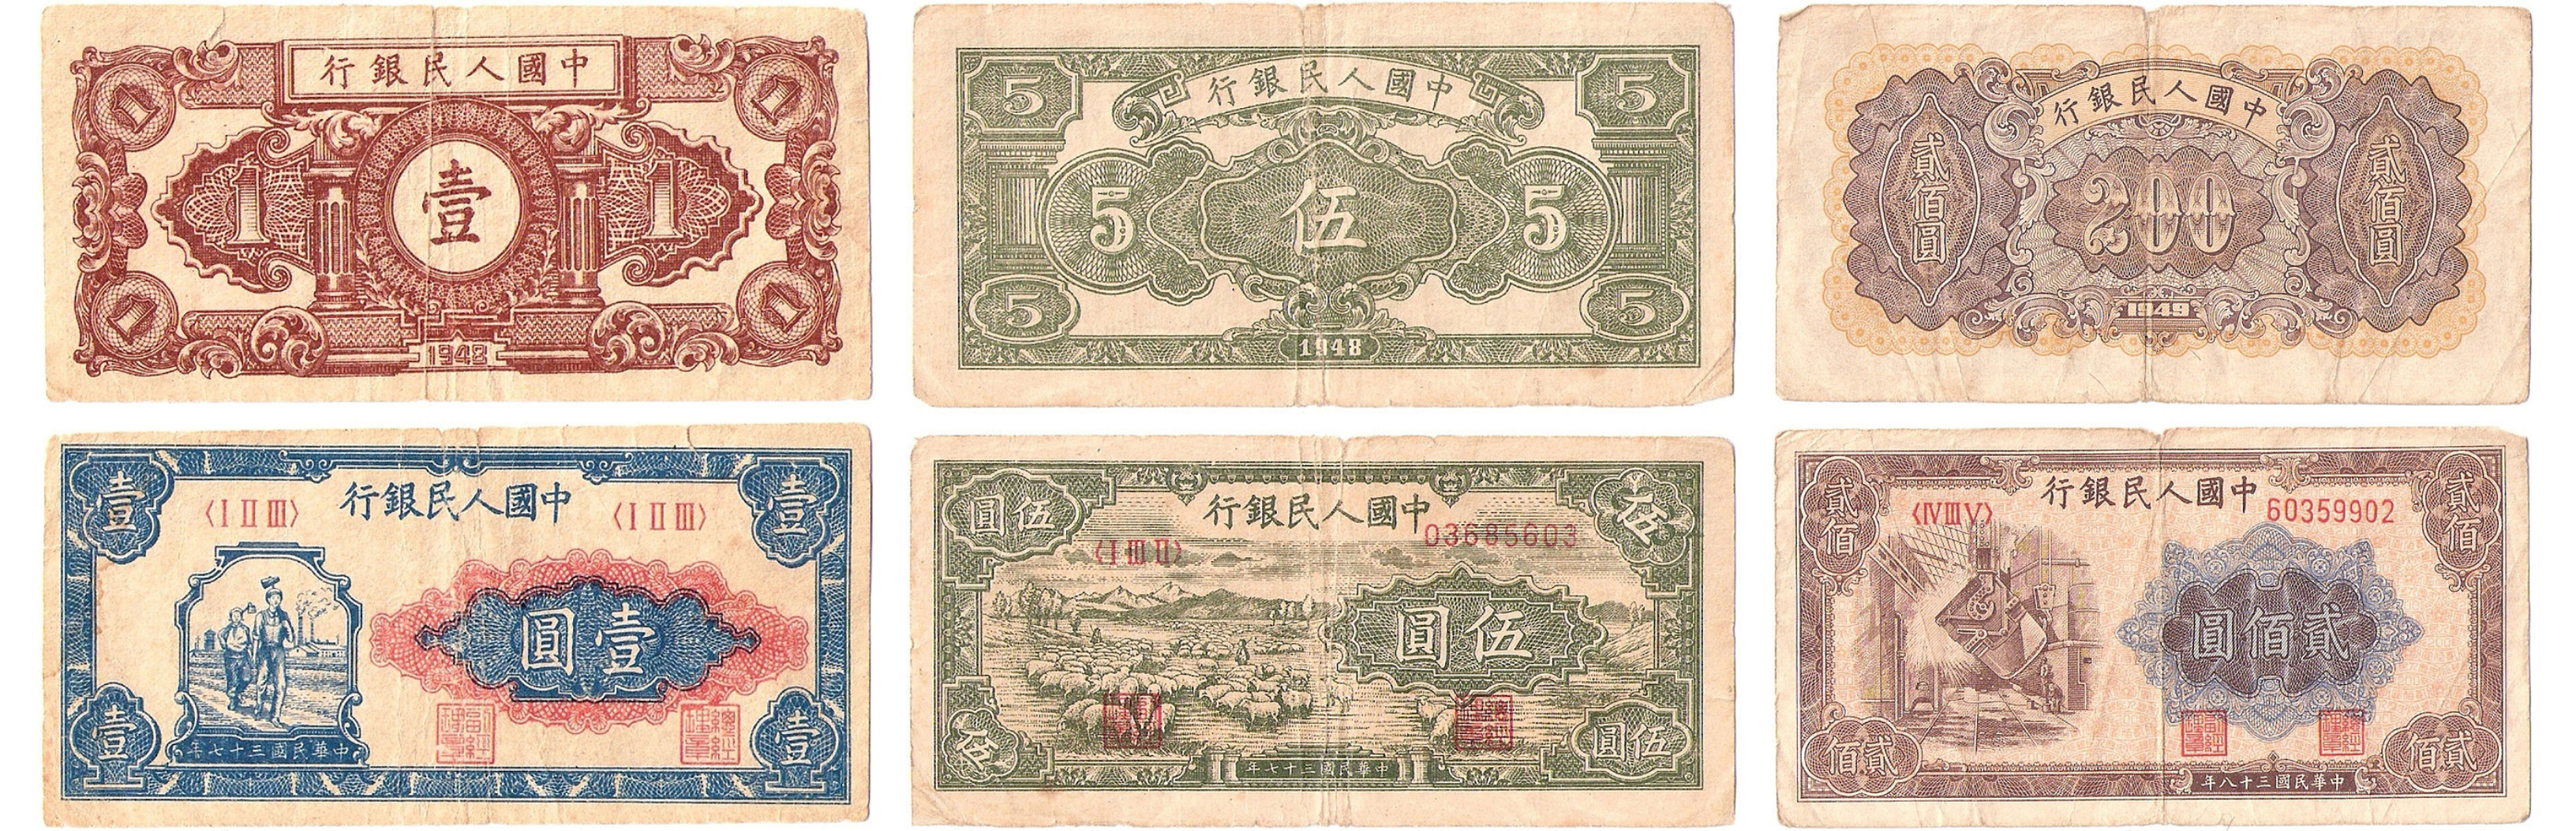 On the left, a 1 Yuan Note. In the middle, a 5 Yuan Note. On the right, a 200 Yuan Note.